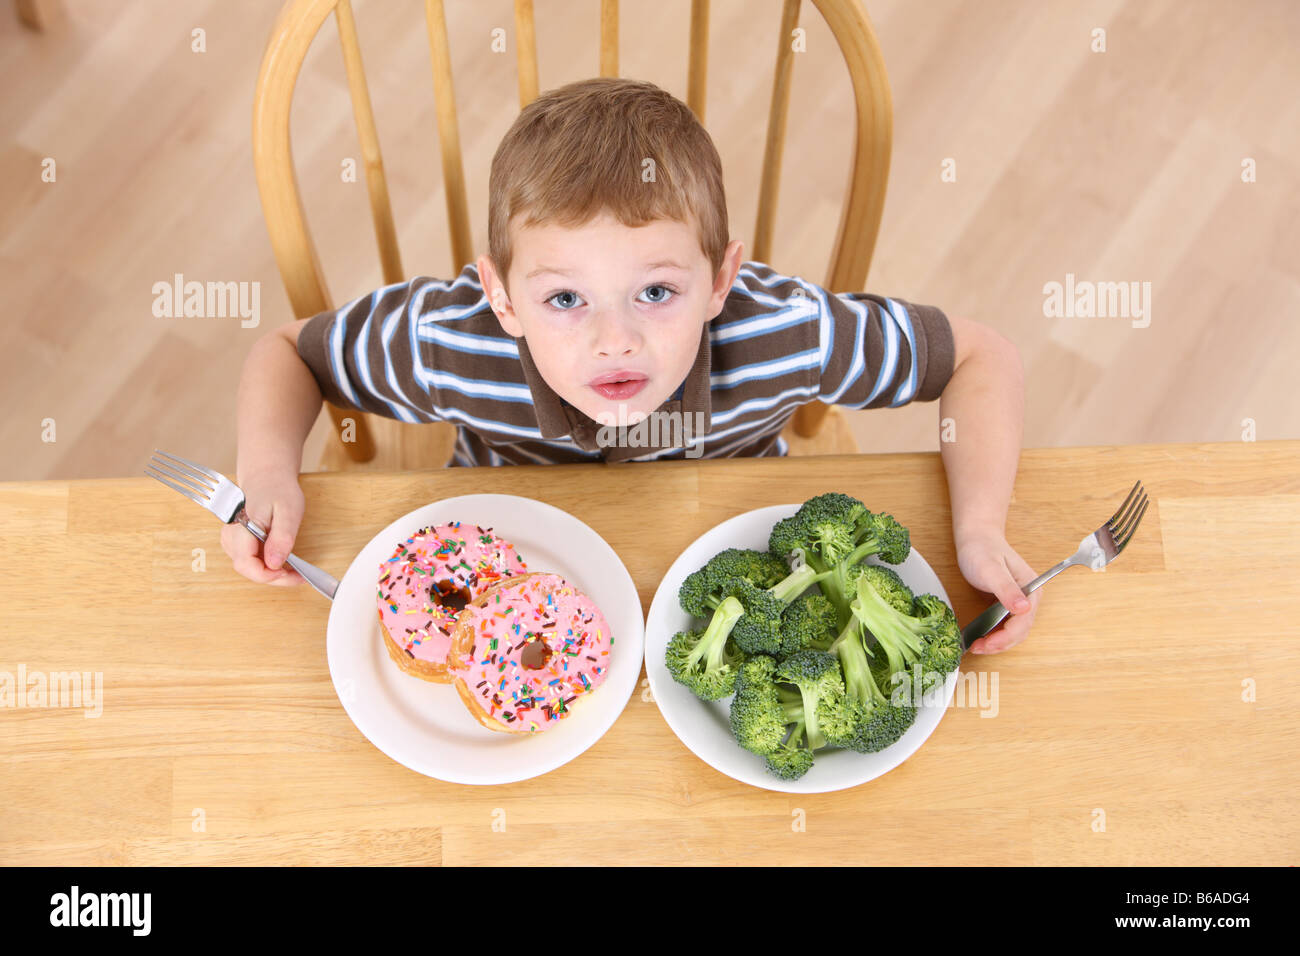 Young boy with plates of broccoli and doughnuts Stock Photo